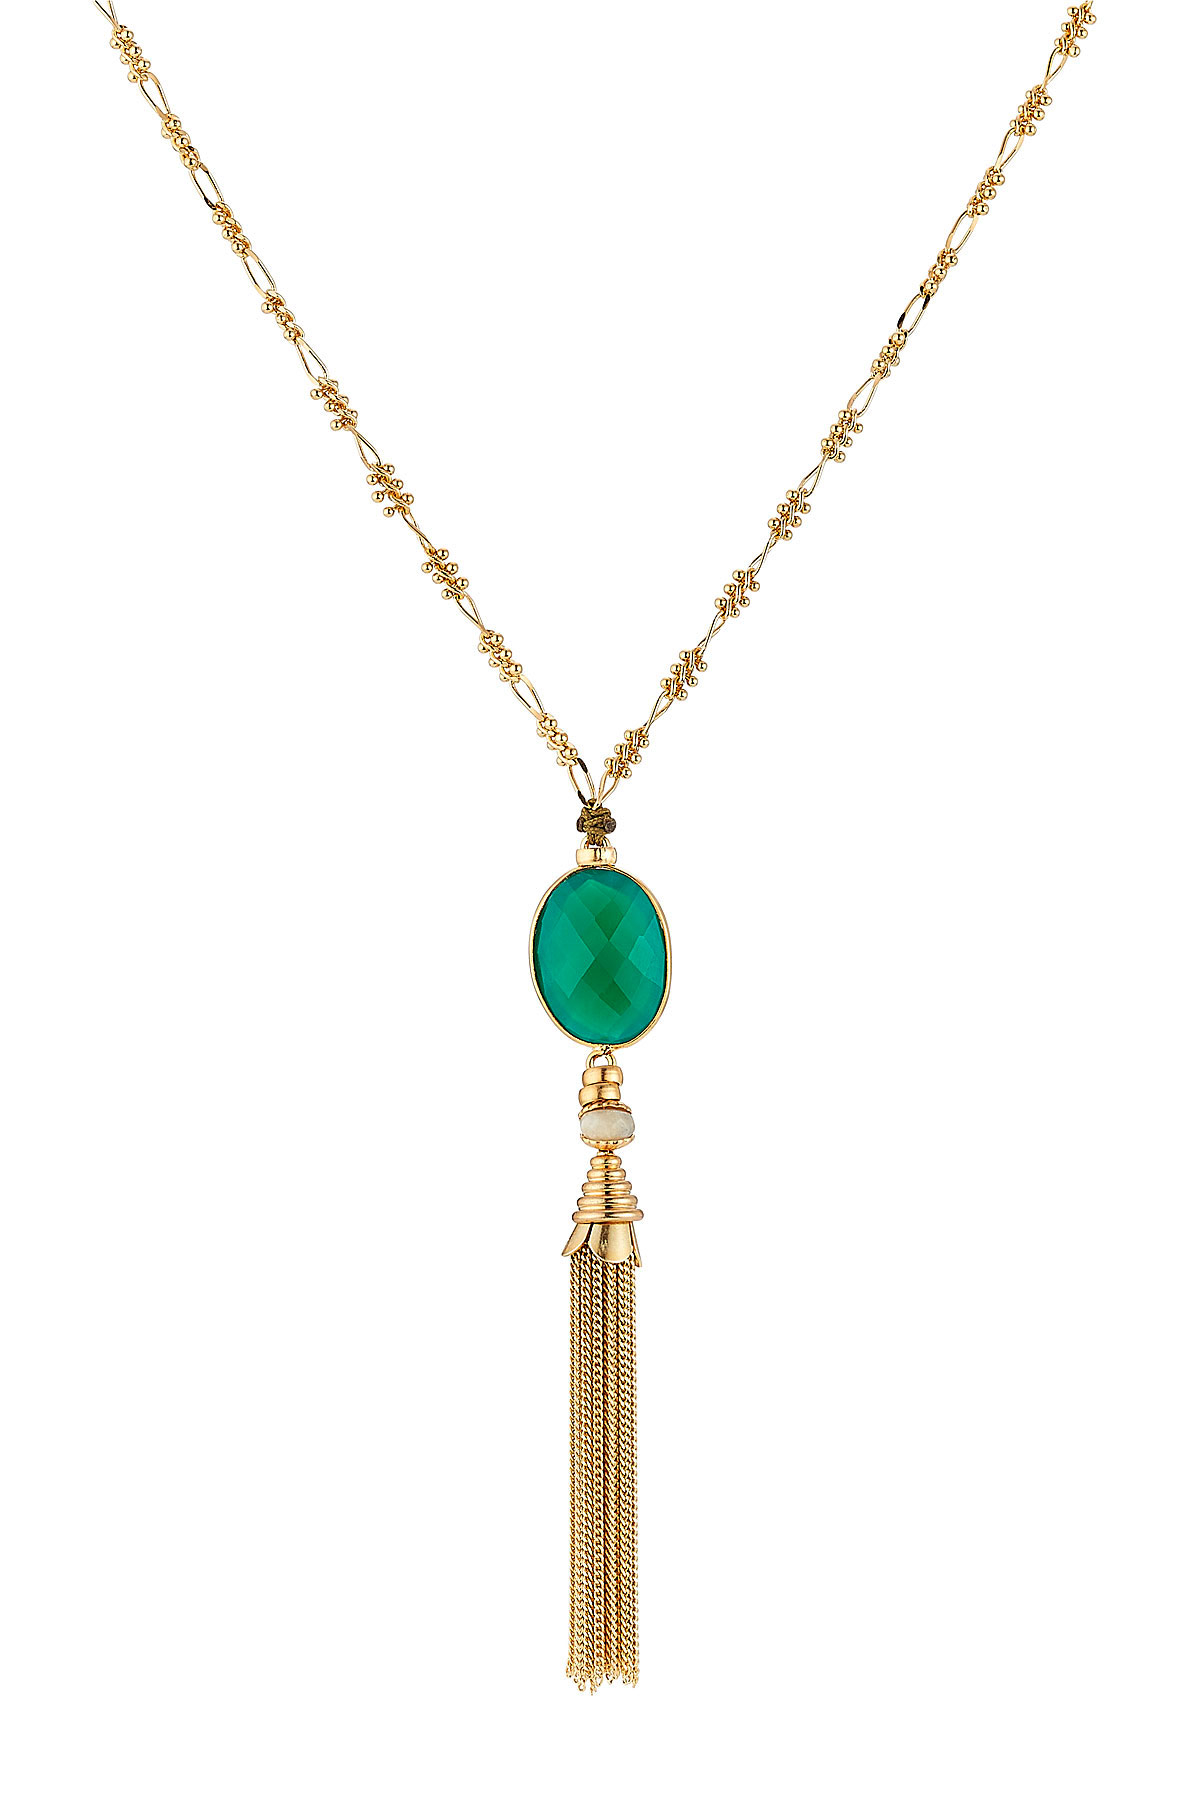 Lyst - Gas Bijoux Serti Pompom Long Gold Plated Necklace in Metallic